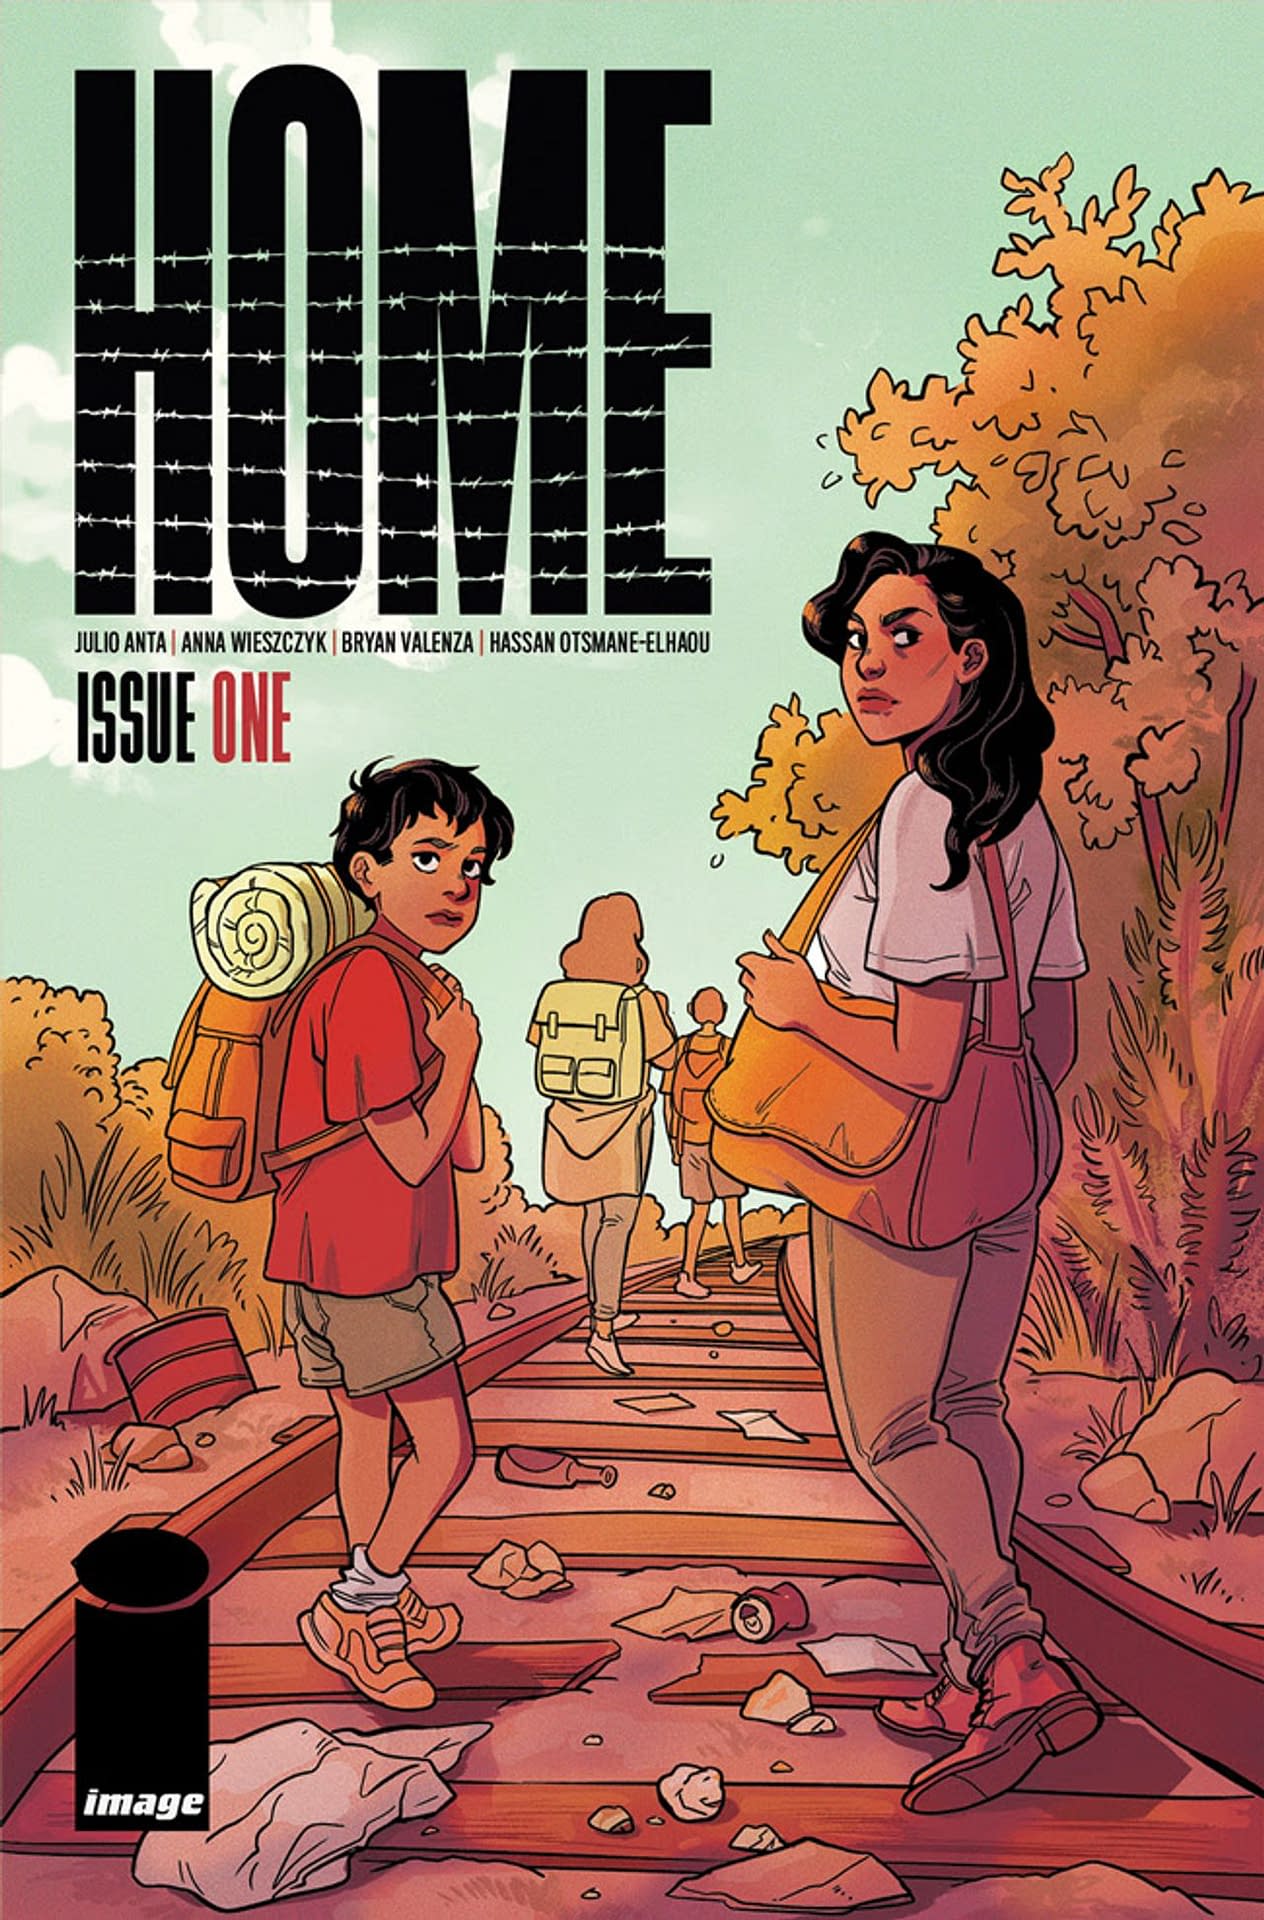 Home: Immigration, Border Patrol and Superpowers in New Image Comic